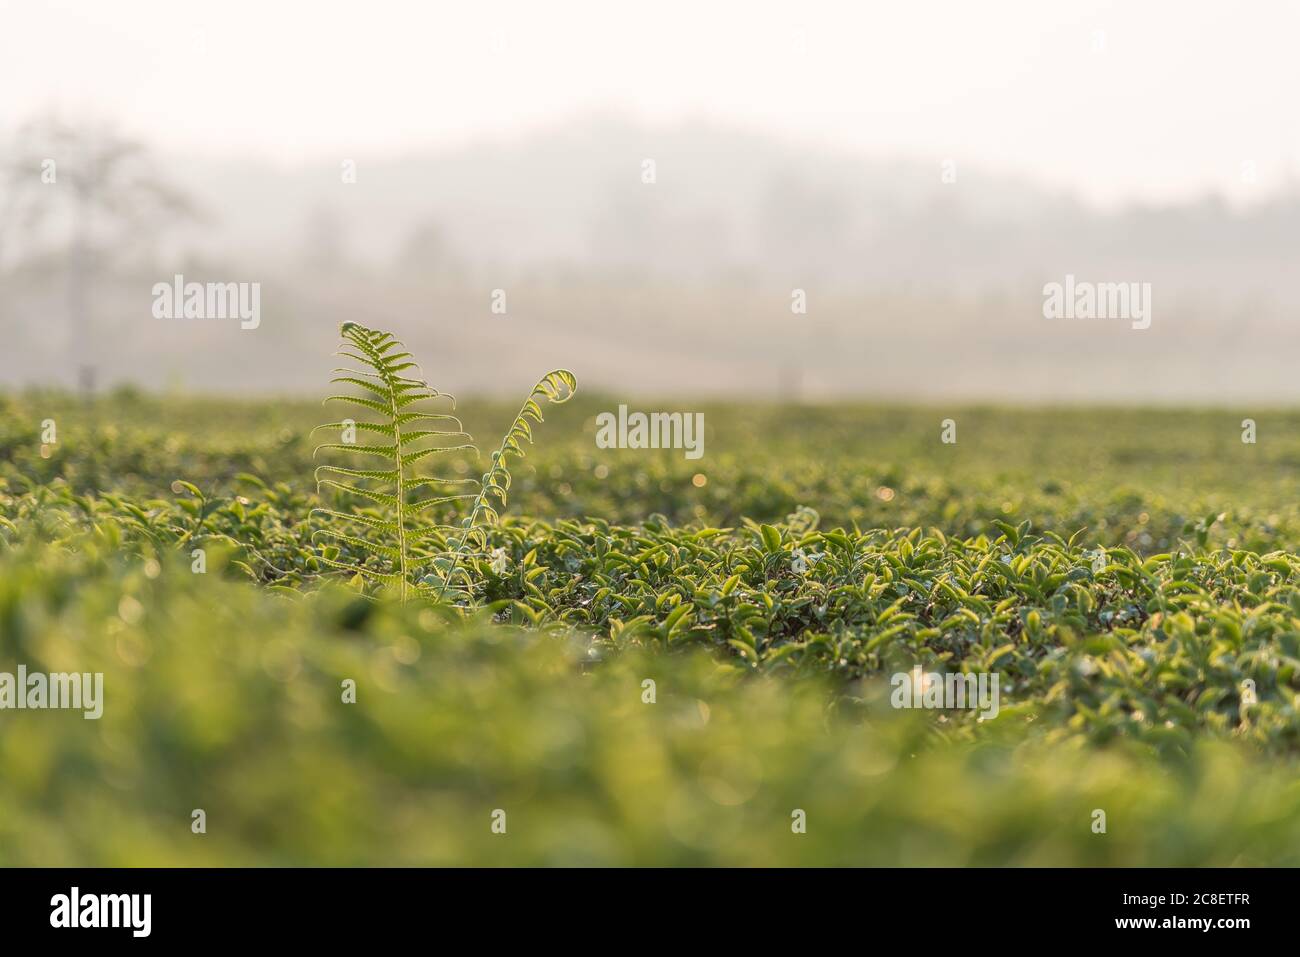 The scenery of the fern leaves growing over the row of tea plantation in Chiang Rai, Thailand. Stock Photo